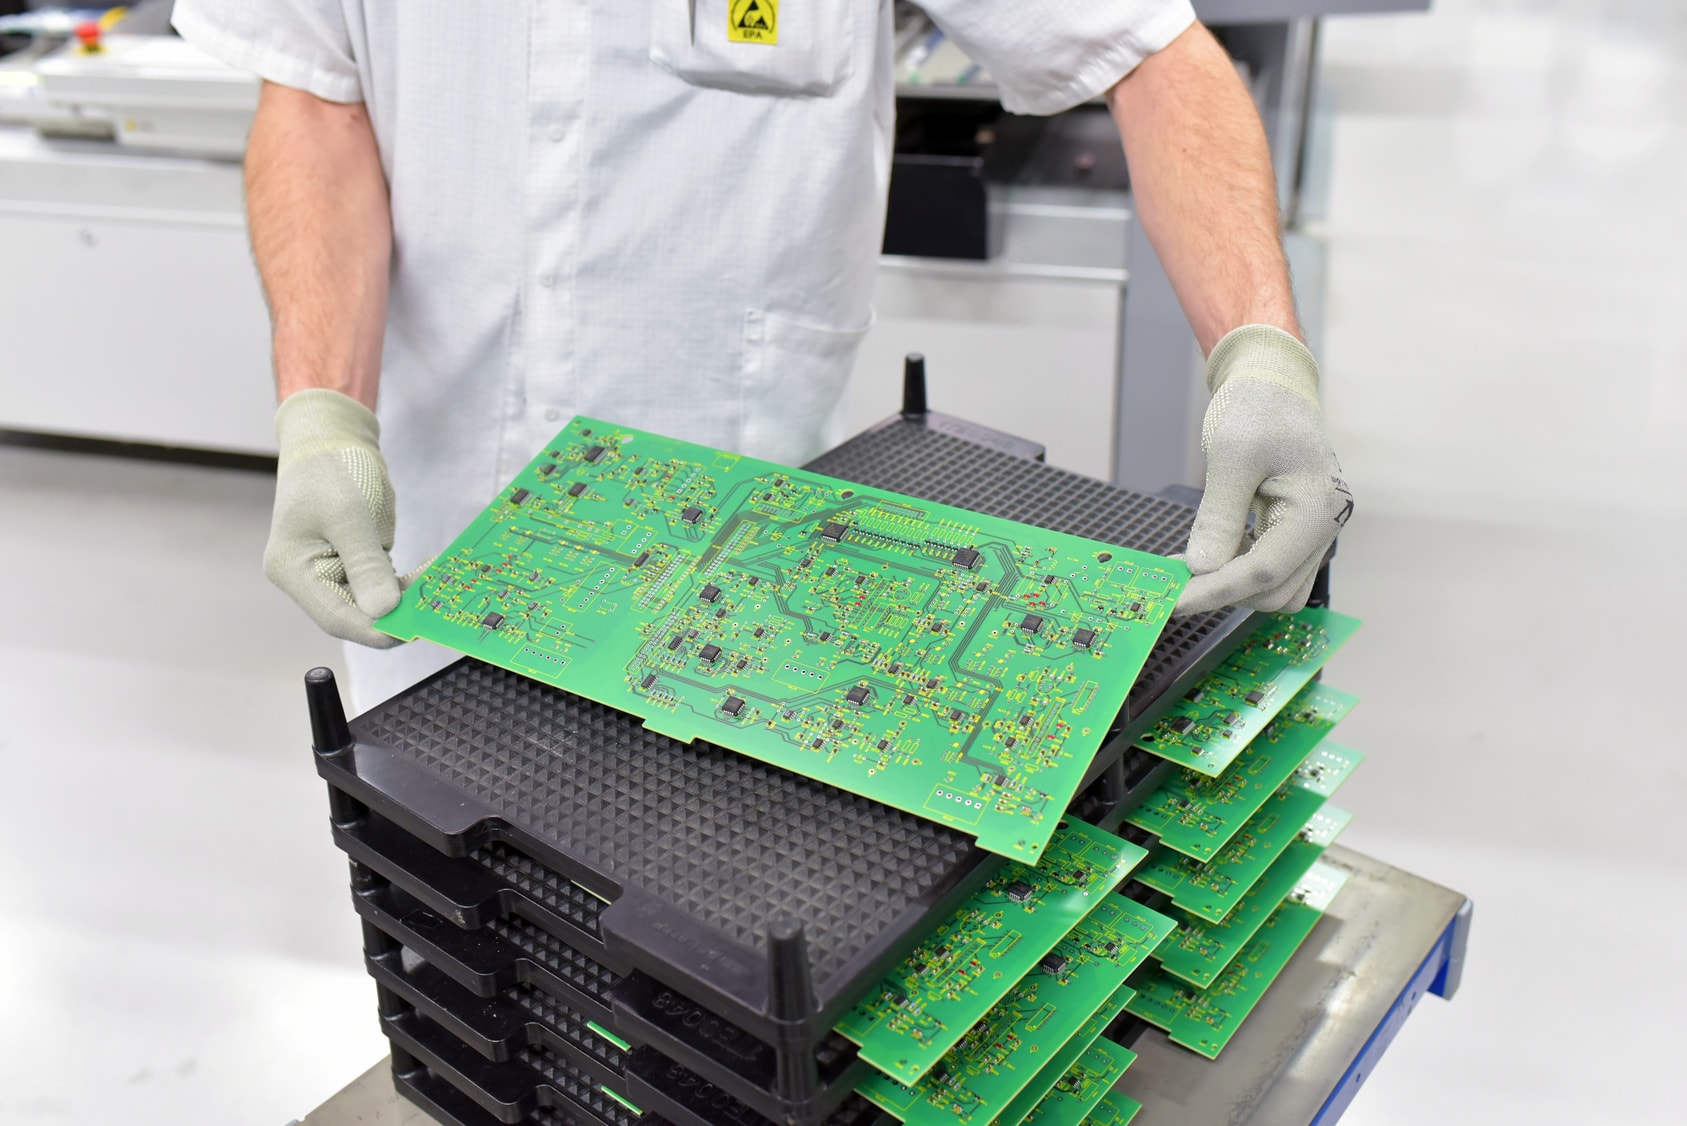 What Is a Printed Circuit Board and What Do You Use One For?